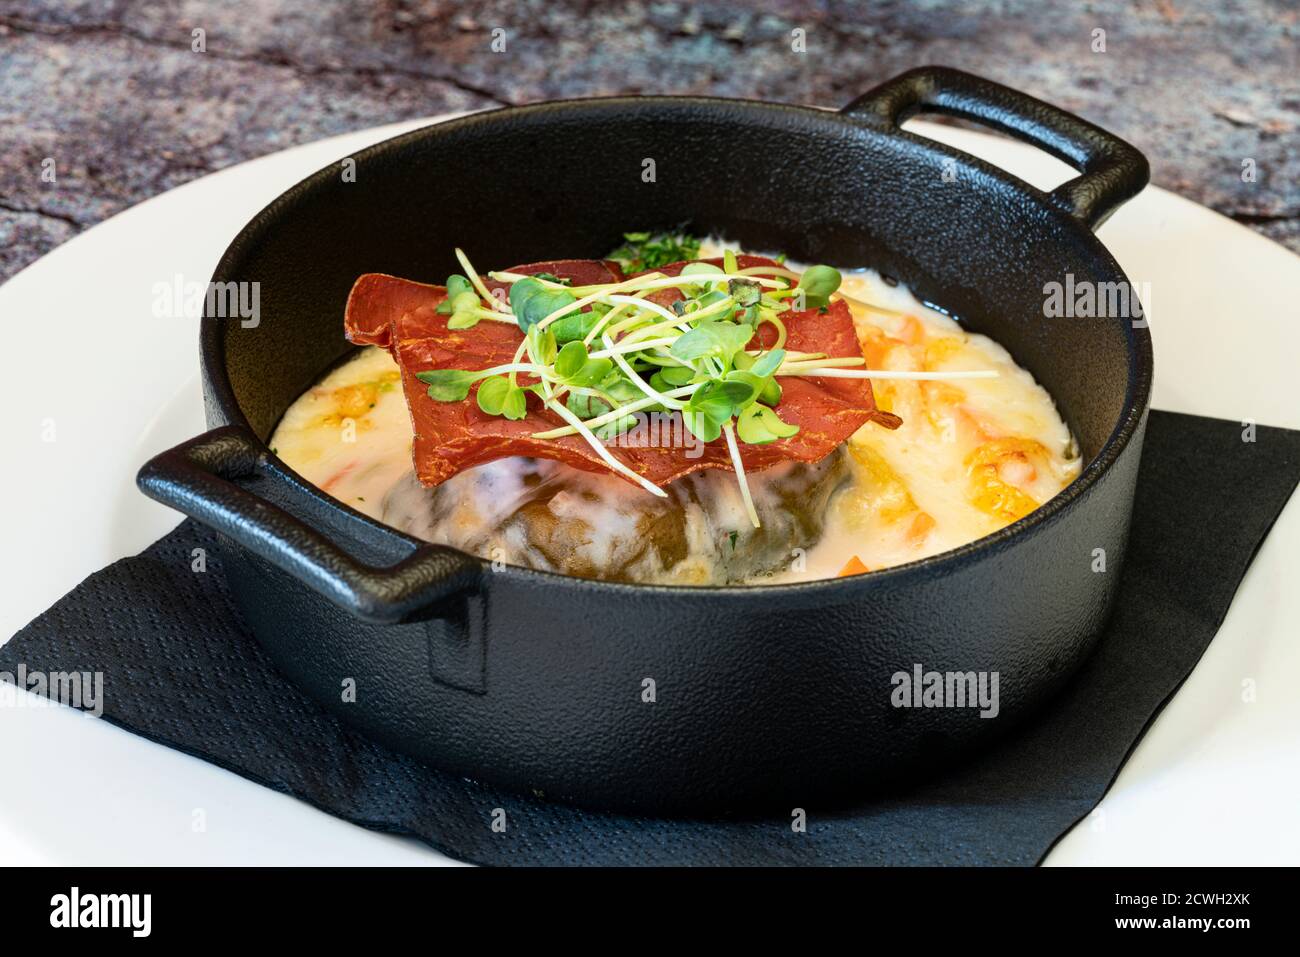 Vegetables and cured meat cooked in owen served in a pot, Engadine, Switzerland Stock Photo